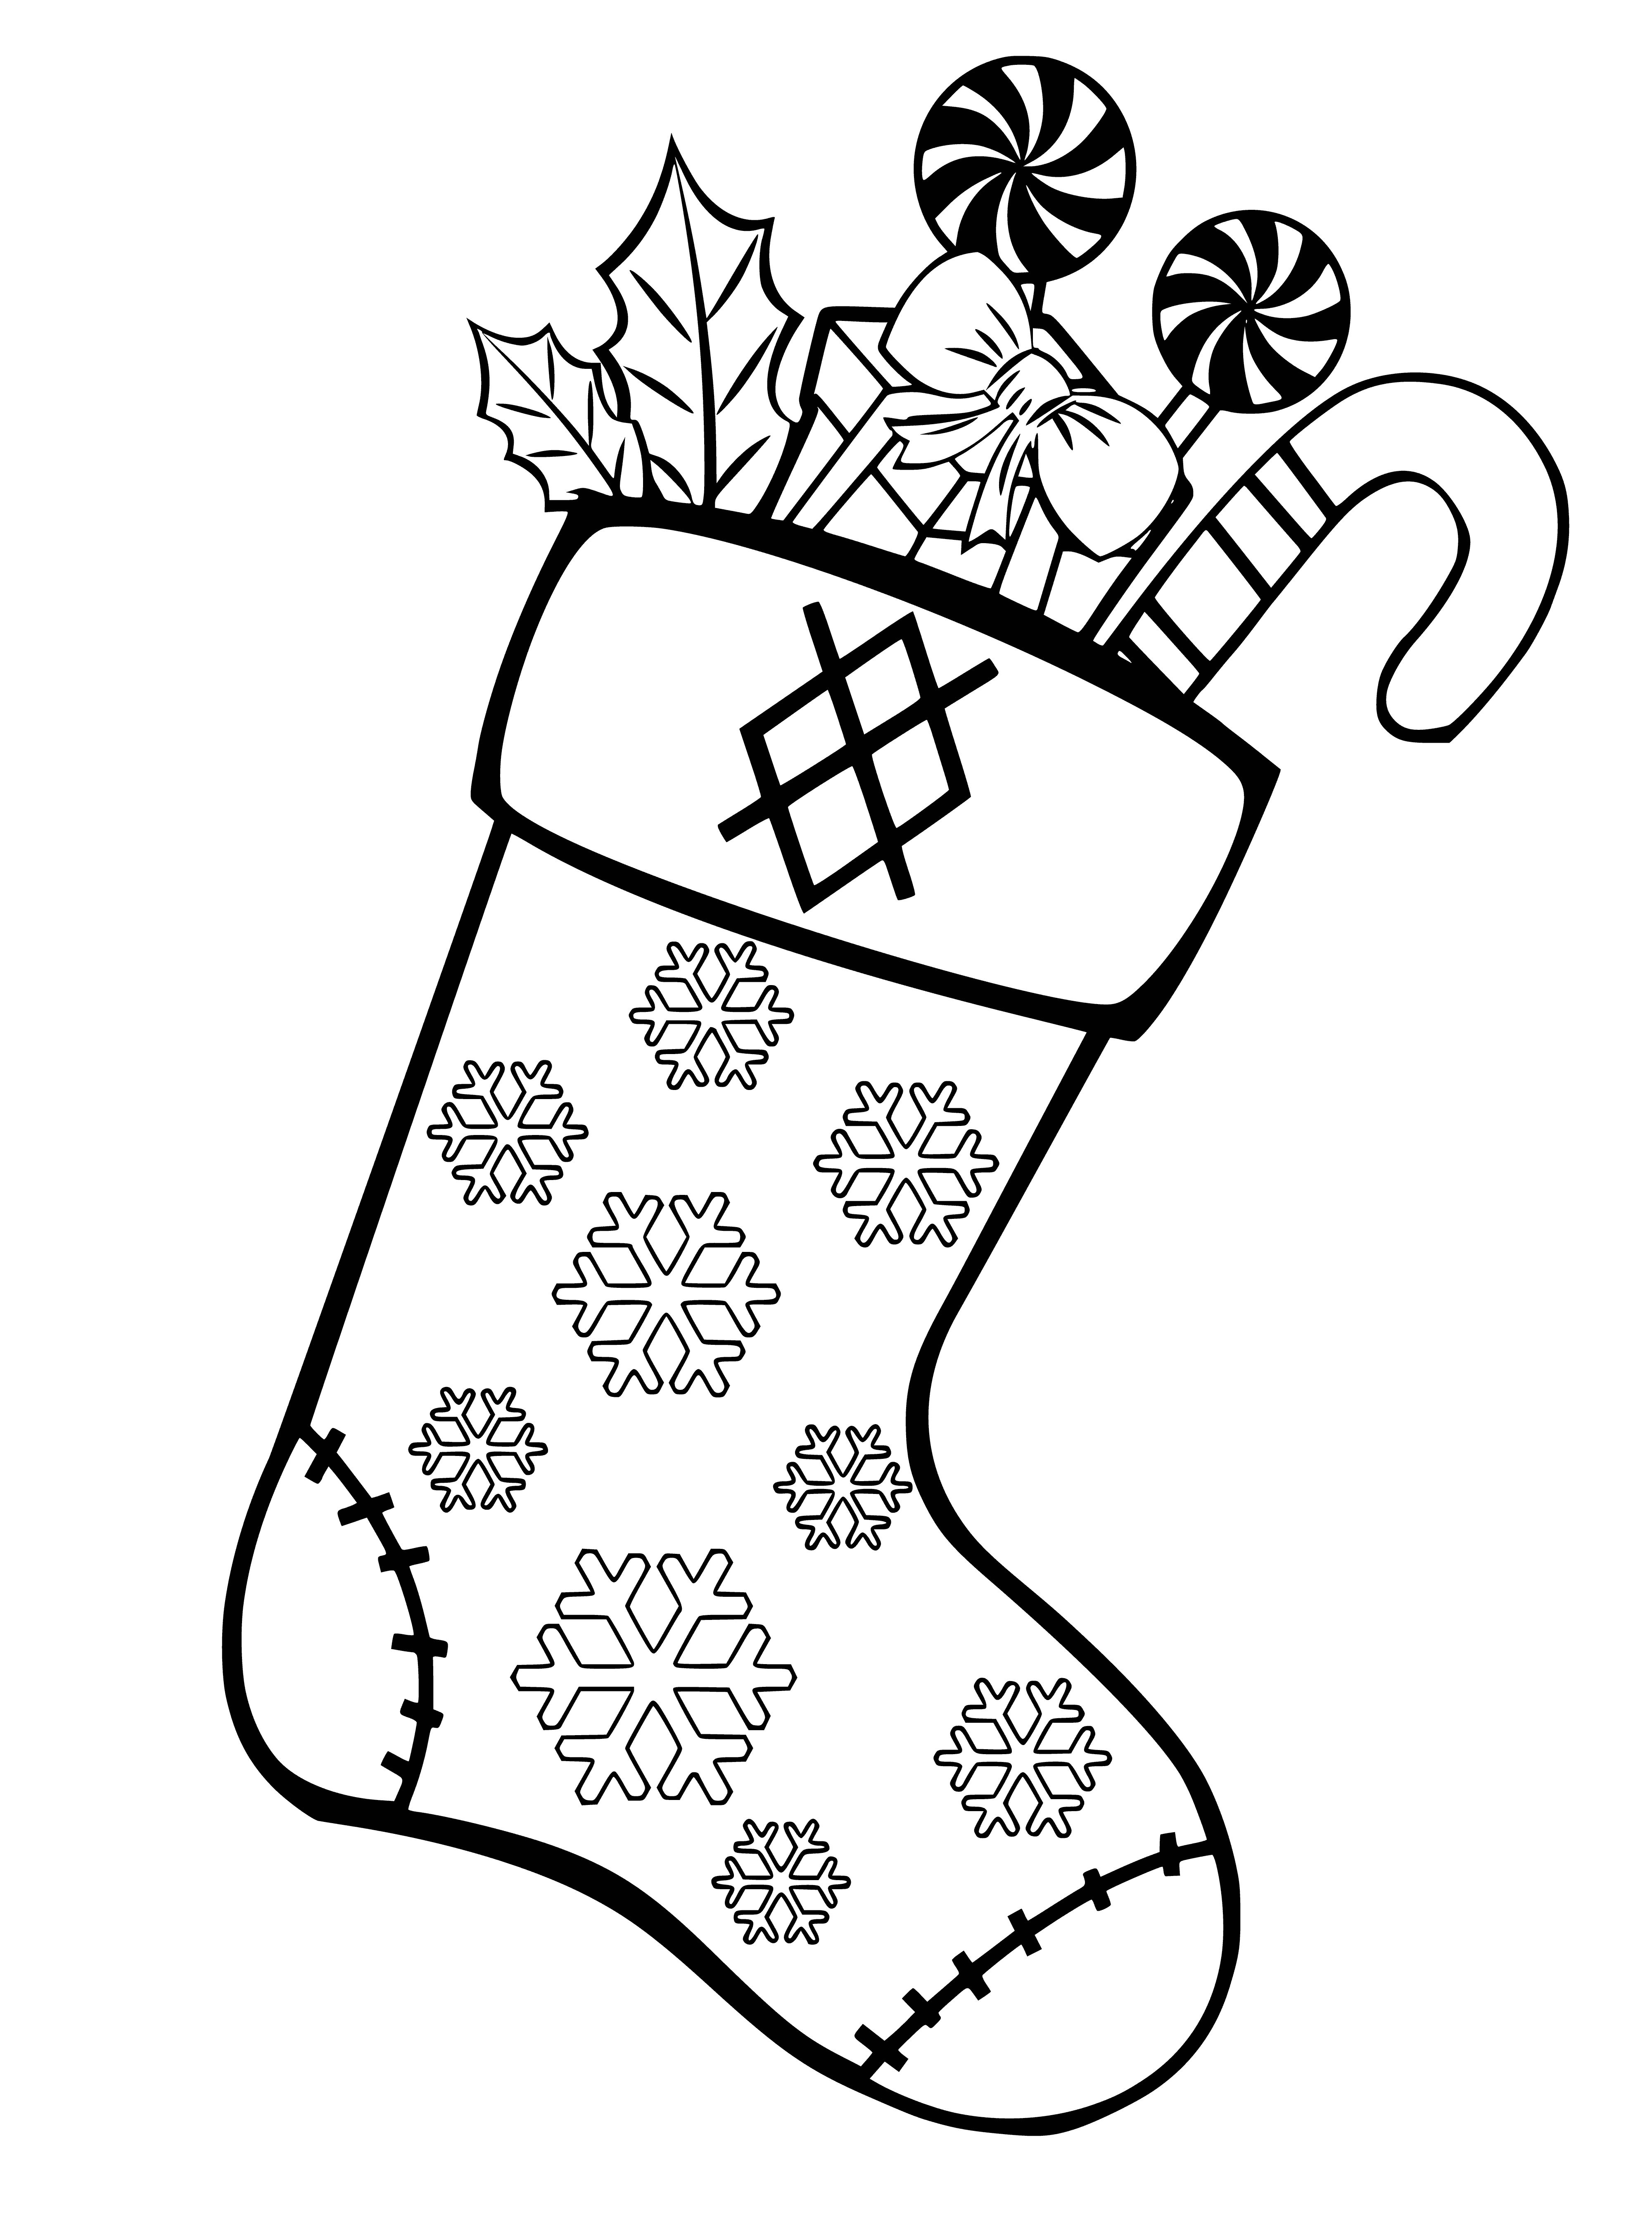 coloring page: Festive Christmas socks adorn the mantle: red & green, candy cane pattern! #HappyHolidays